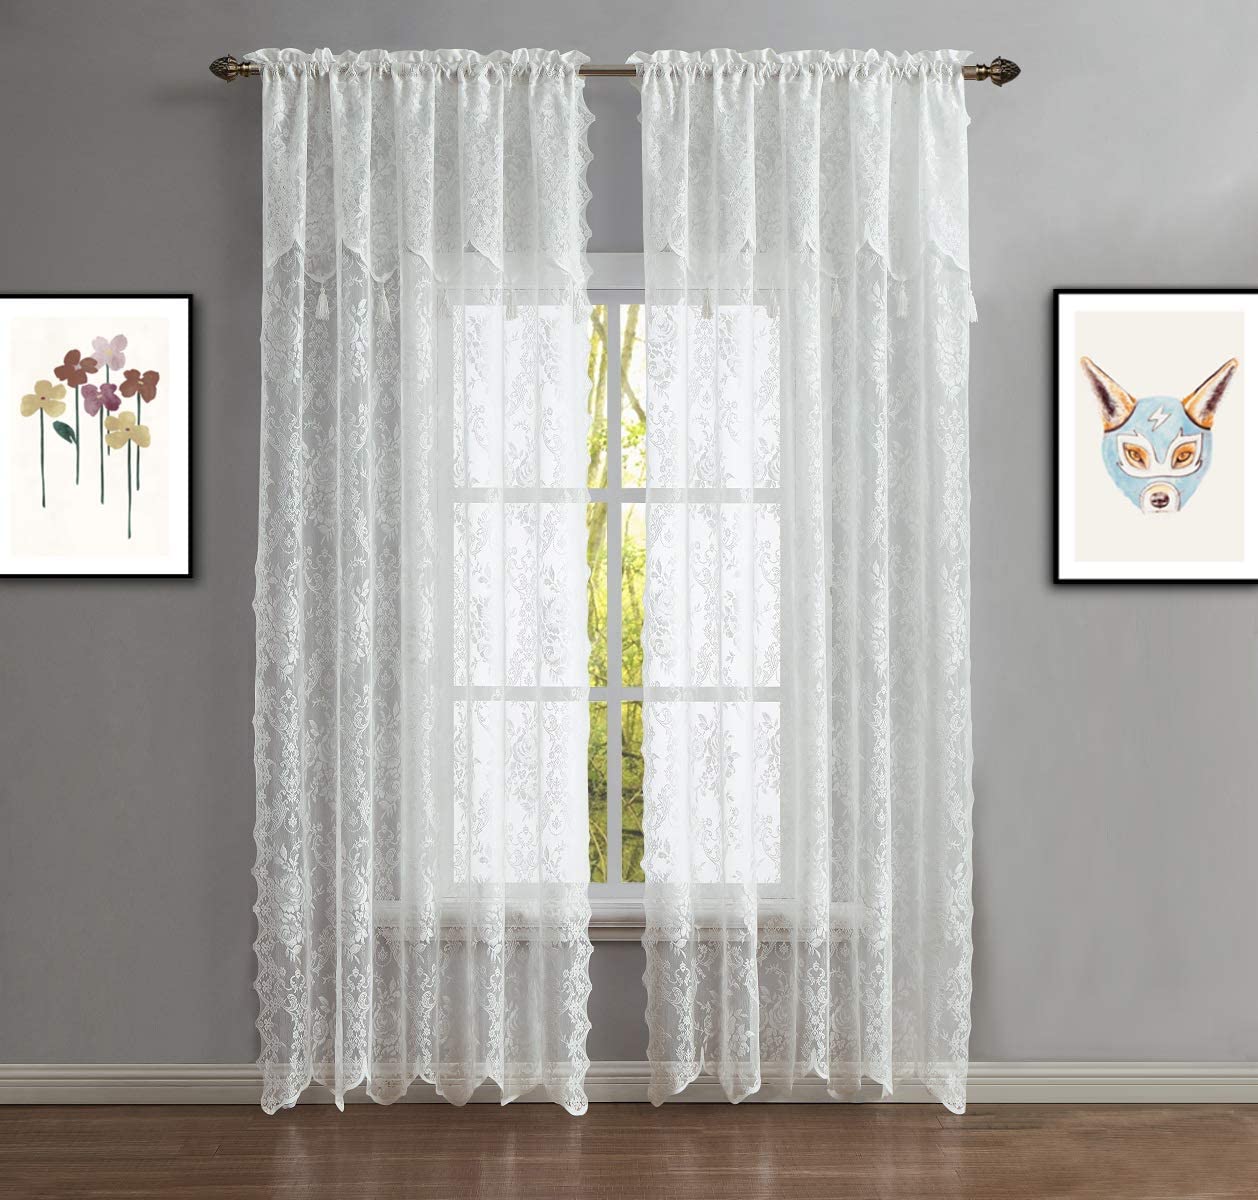 Warm Home Designs Pair of Semi Sheer Lace Curtain & Attached